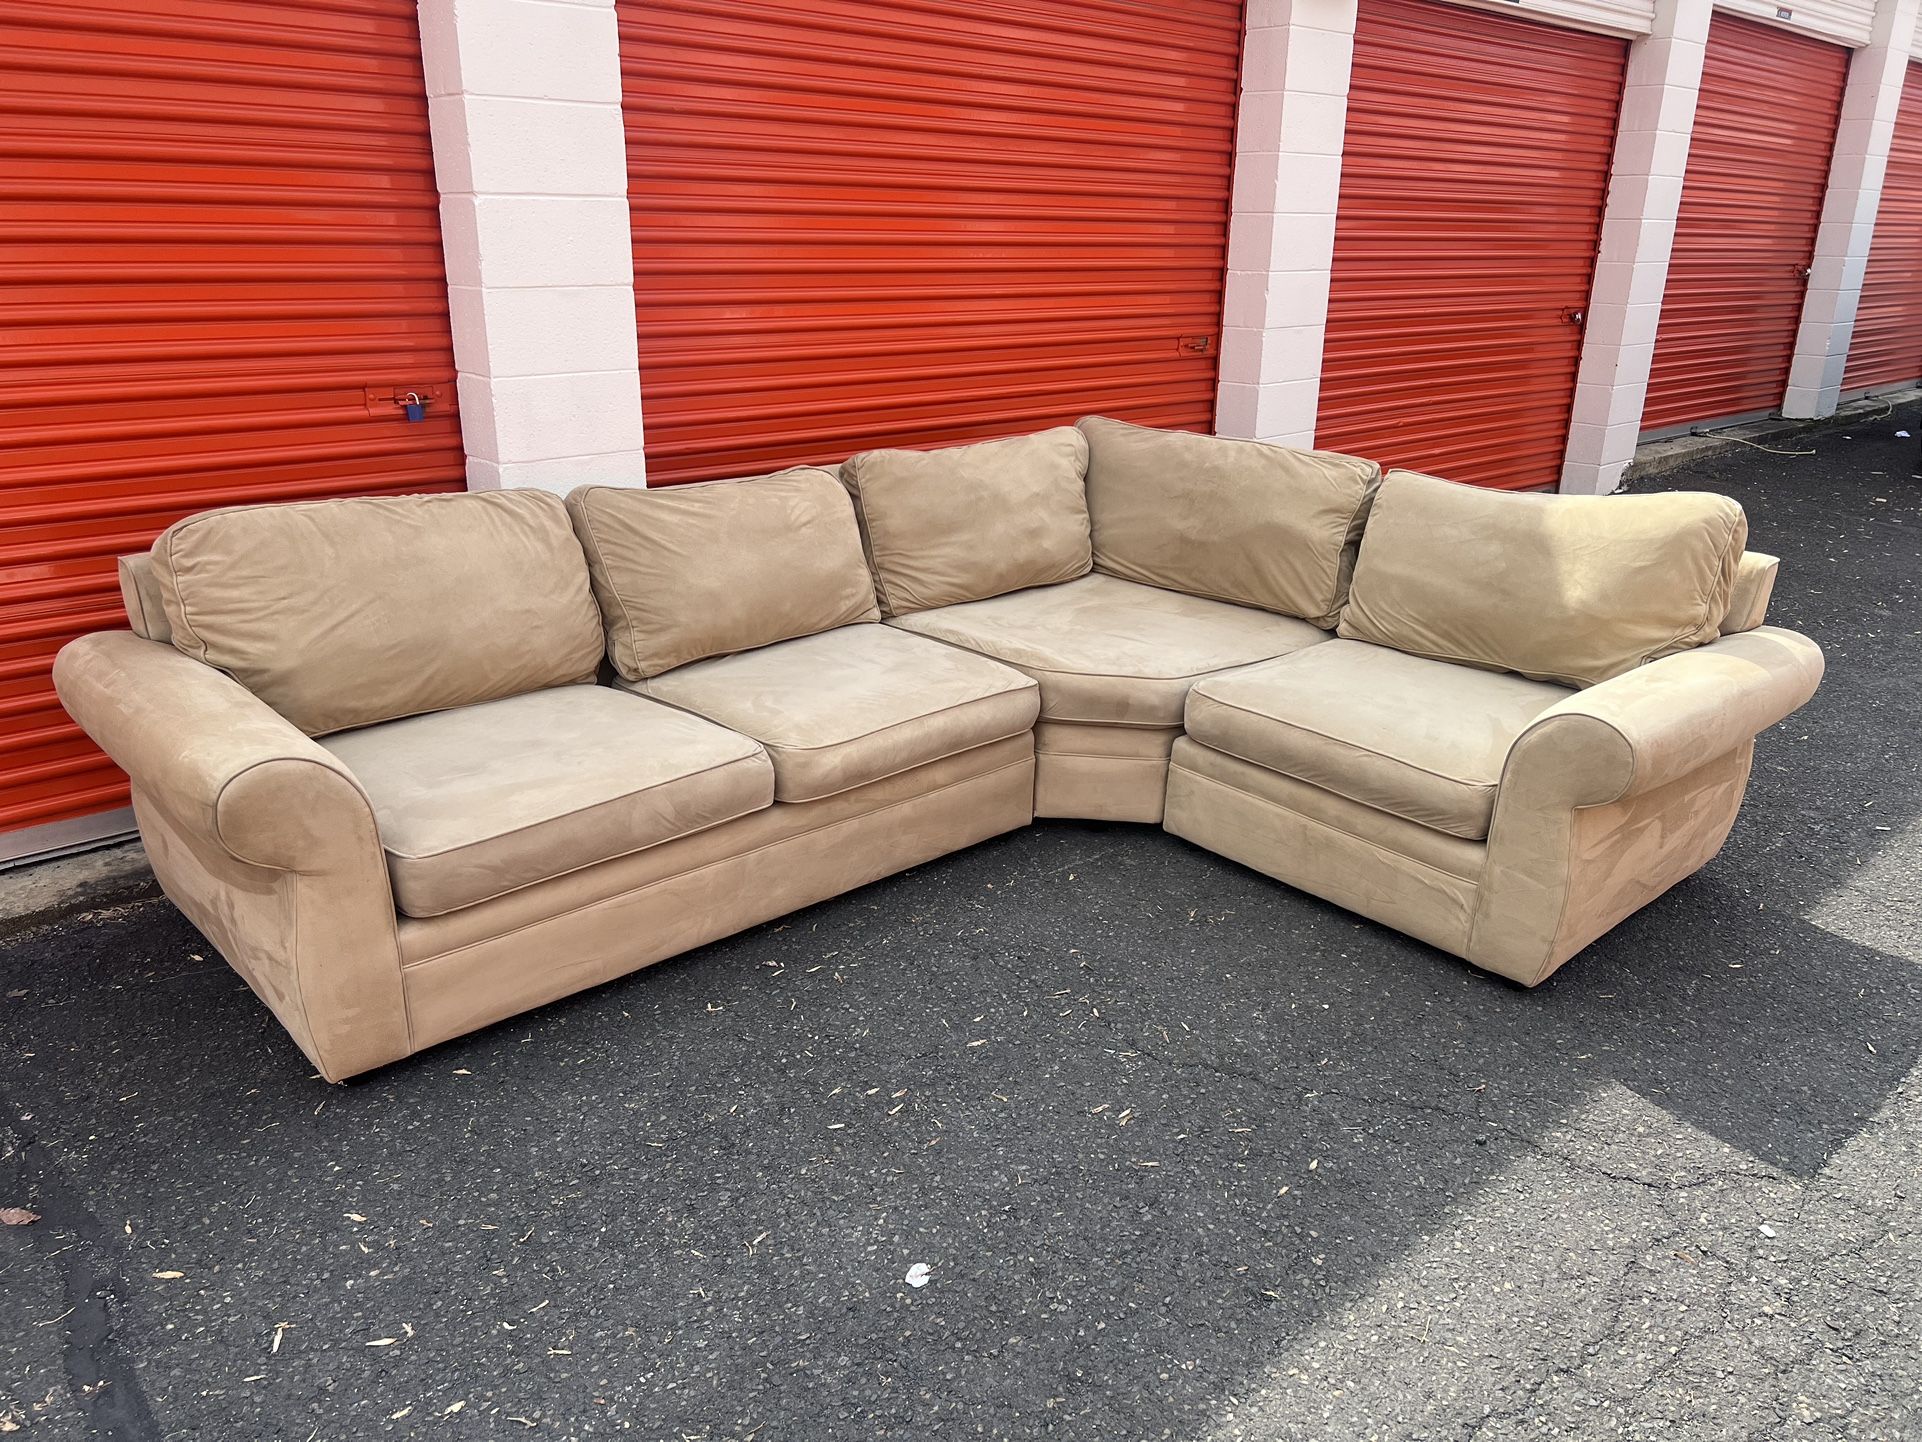 Tan 3 Piece Sectional Couch from Pottery Barn